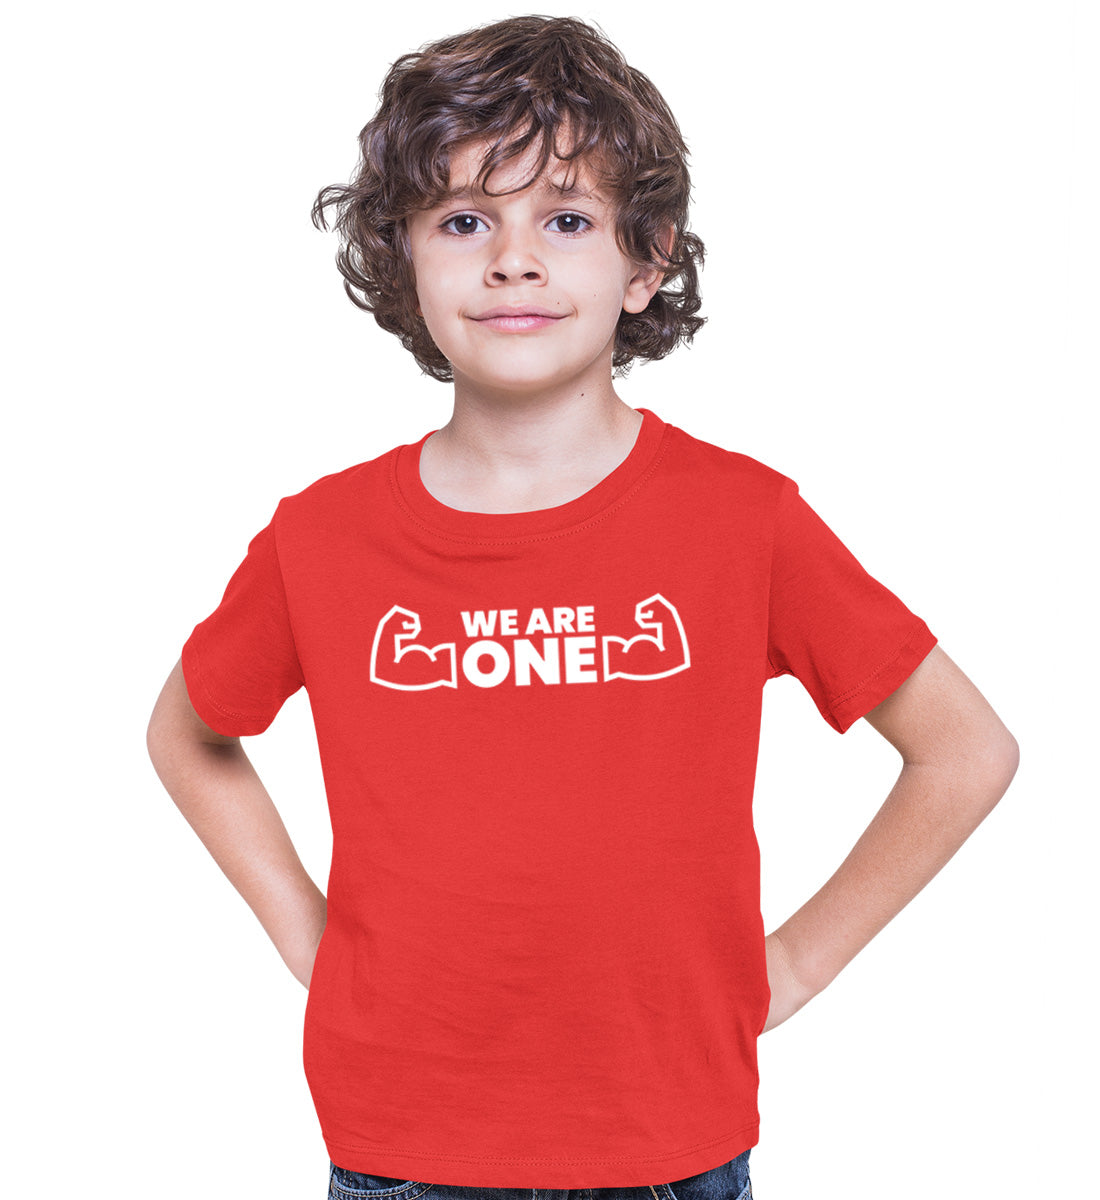 One Family Matching Printed Tshirts (Pack Of 3)